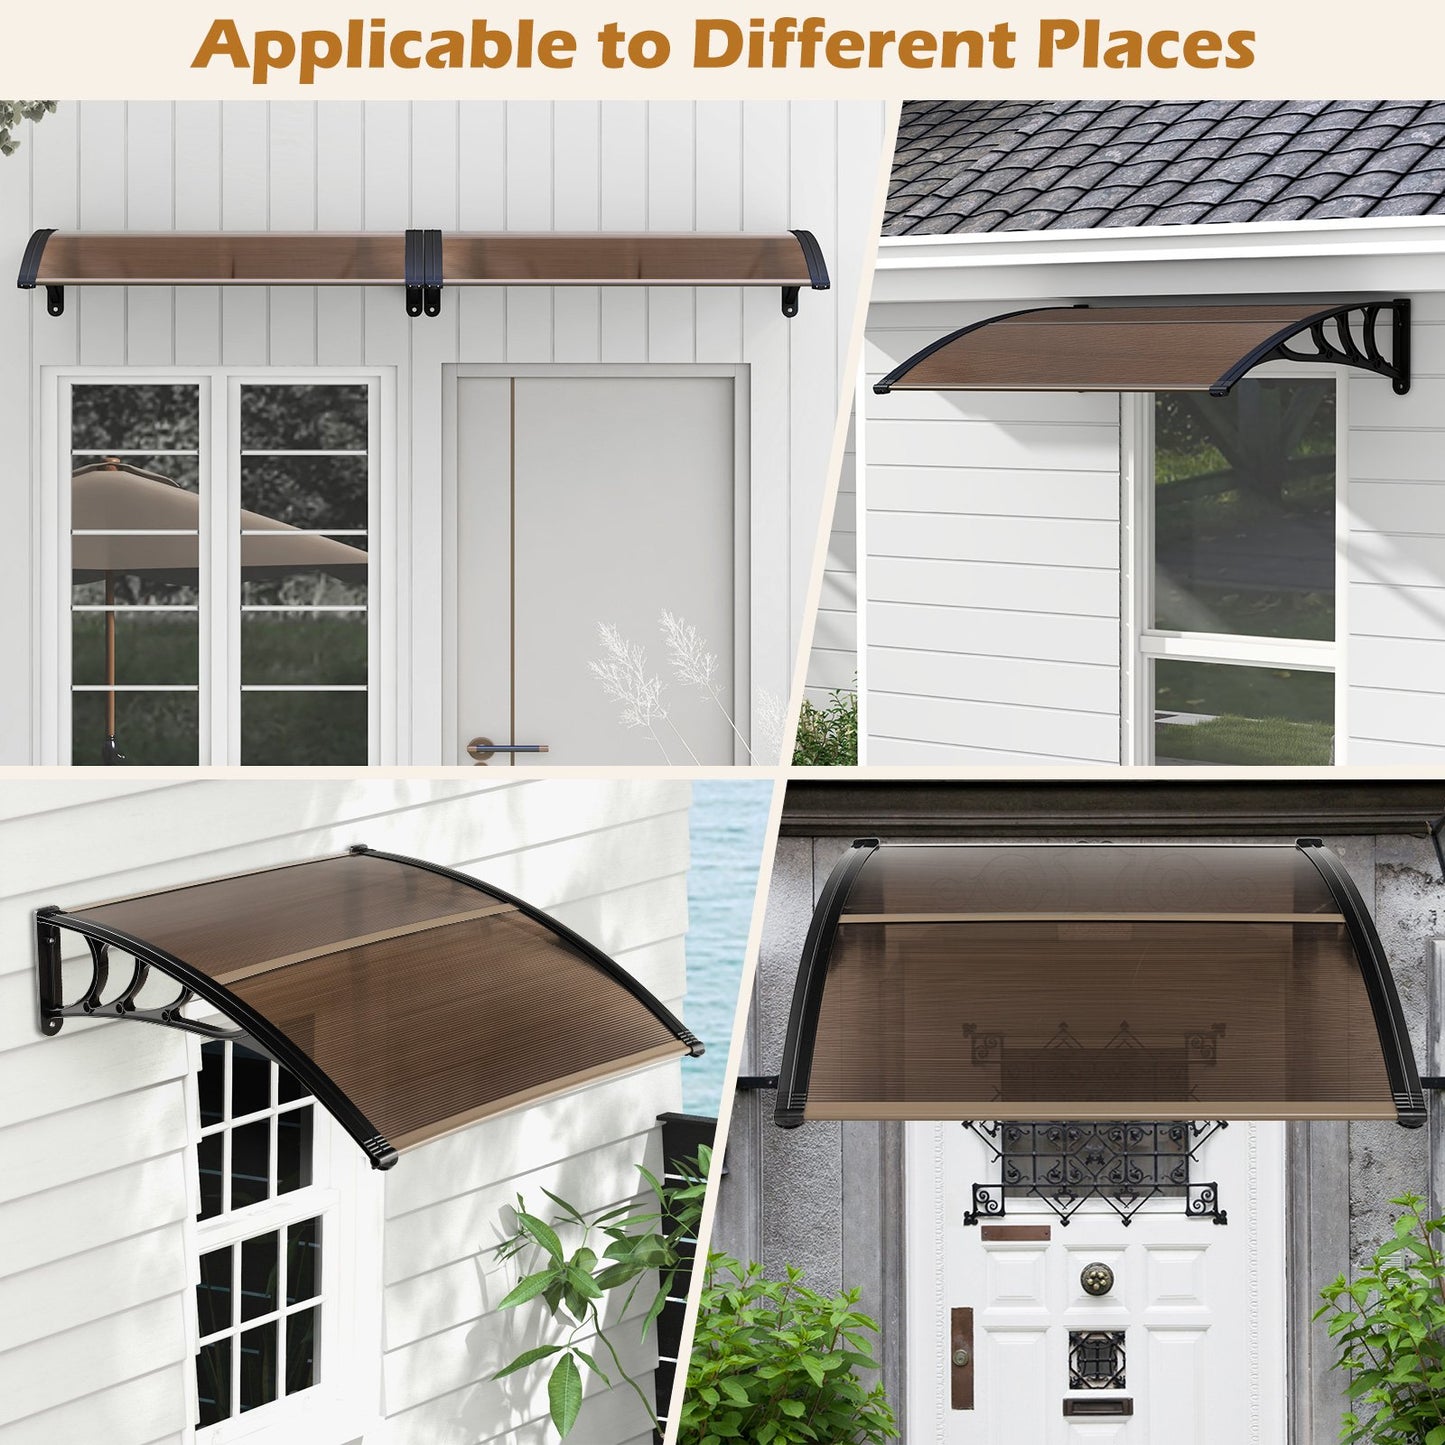 Outdoor Front Door Patio Overhang Awning for Sunlight Rain Snow Wind Protection-48 x 40 Inch, Brown